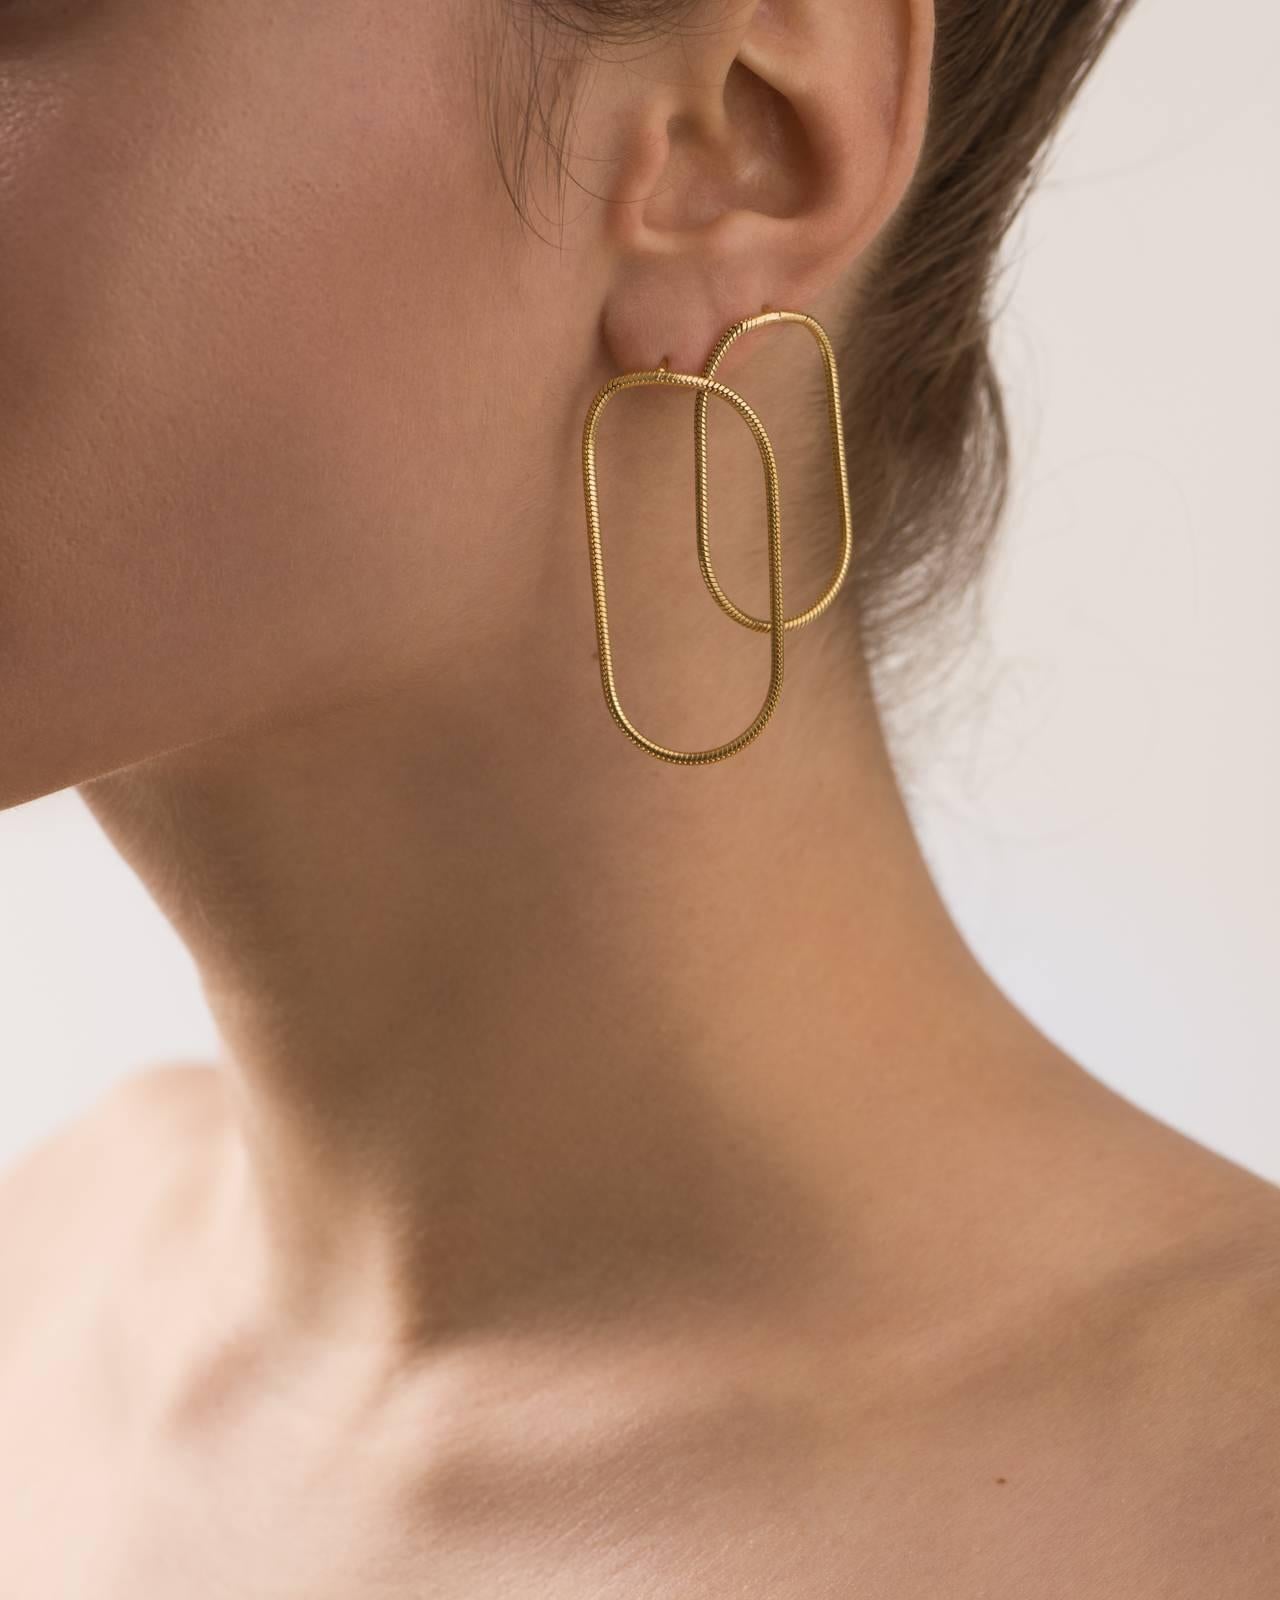 Earrings Hoop Shape Minimal Snake Chain 18 Karat Gold-Plated Silver Small, Greek In New Condition For Sale In Athens, GR